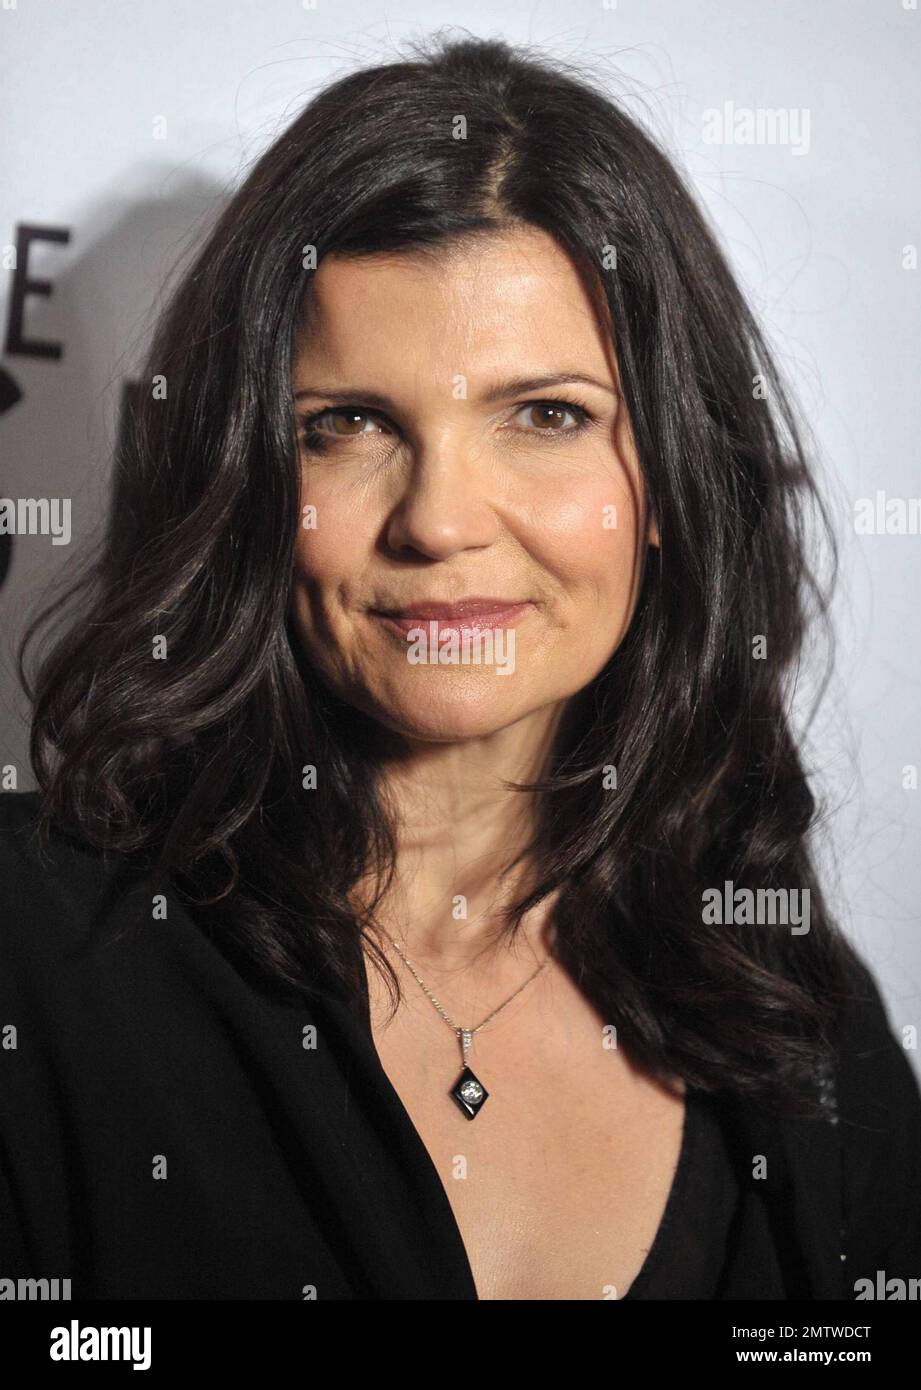 Ali Hewson arrives at The Ace Hotel for the premiere of 'The Lazarus Effect', a public awareness film presented by HBO and directed by photographer Brigitte Lacombe.  The film is part of a larger campaign spearheaded by (Red), the consumer-driven fundraising brand designed to pool funds for those affected by AIDS in Africa.  'The Lazarus Effect' features celebrities such as Hugh Jackman, Penelope Cruz, Benicio Del Toro and (Red) co-founder Bono showing off what they can buy for 40 cents. New York, NY. 05/04/10. Stock Photo